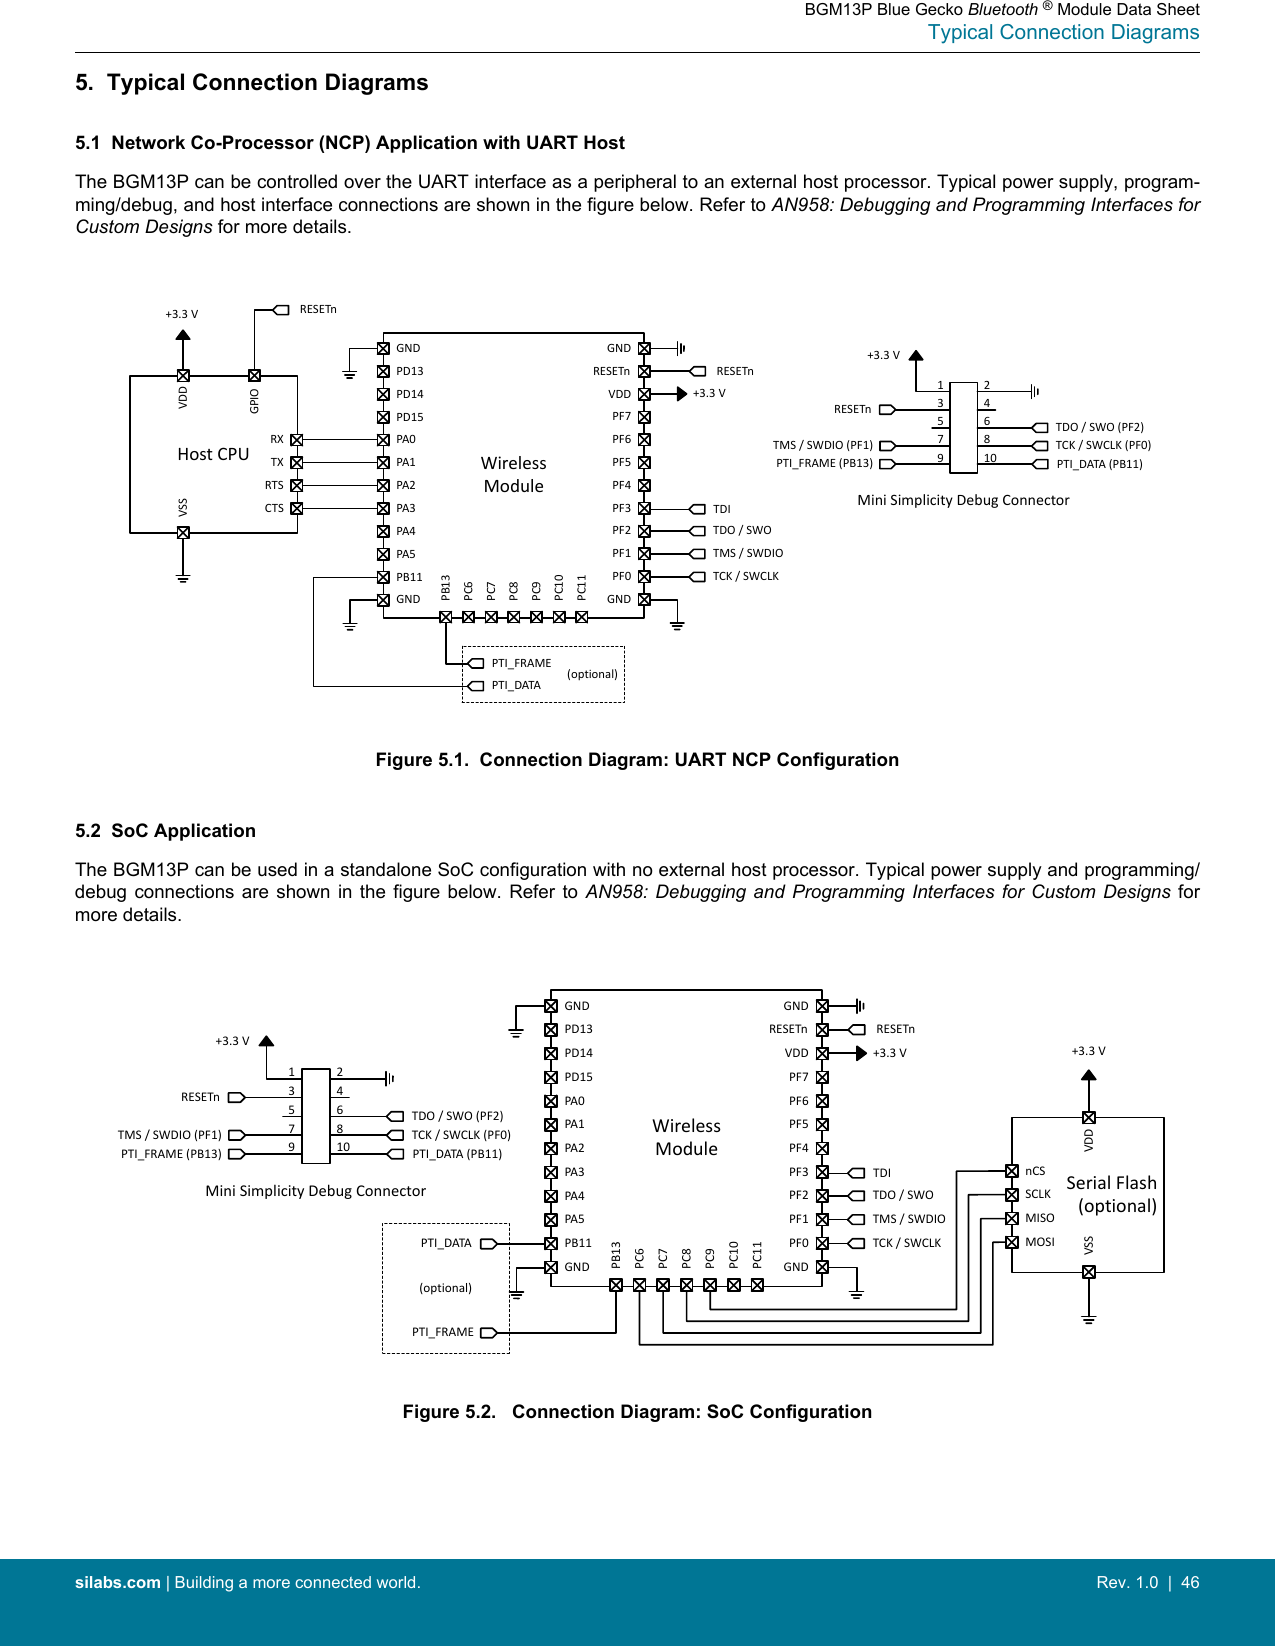 5.  Typical Connection Diagrams5.1  Network Co-Processor (NCP) Application with UART HostThe BGM13P can be controlled over the UART interface as a peripheral to an external host processor. Typical power supply, program-ming/debug, and host interface connections are shown in the figure below. Refer to AN958: Debugging and Programming Interfaces forCustom Designs for more details.Host CPUVDDPTI_FRAMETCK / SWCLKTMS / SWDIOTDO / SWOTDI+3.3 VWirelessModuleGNDPD13PD14PD15PA0PA1PA2PA3PA4PA5PB11GNDGNDRESETnVDDPF7PF6PF5PF4PF3PF2PF1PF0GNDPB13PC6PC7PC8PC9PC10PC11RXTXRTSCTSGPIORESETnVSS+3.3 VRESETnPTI_DATAPTI_FRAME (PB13)13579246810+3.3 VTDO / SWO (PF2)TCK / SWCLK (PF0)TMS / SWDIO (PF1)RESETnMini Simplicity Debug ConnectorPTI_DATA (PB11)(optional)Figure 5.1.  Connection Diagram: UART NCP Configuration5.2  SoC ApplicationThe BGM13P can be used in a standalone SoC configuration with no external host processor. Typical power supply and programming/debug connections  are  shown  in  the  figure  below.  Refer  to  AN958:  Debugging  and  Programming  Interfaces  for Custom  Designs  formore details.Serial Flash(optional)VDDTCK / SWCLKTMS / SWDIOTDO / SWOTDI+3.3 VWirelessModuleGNDPD13PD14PD15PA0PA1PA2PA3PA4PA5PB11GNDGNDRESETnVDDPF7PF6PF5PF4PF3PF2PF1PF0GNDPB13PC6PC7PC8PC9PC10PC11MOSIMISOSCLKnCSVSS+3.3 VRESETnPTI_FRAME (PB13)13579246810+3.3 VTDO / SWO (PF2)TCK / SWCLK (PF0)TMS / SWDIO (PF1)RESETnMini Simplicity Debug ConnectorPTI_DATA (PB11)(optional)PTI_FRAMEPTI_DATAFigure 5.2.   Connection Diagram: SoC ConfigurationBGM13P Blue Gecko Bluetooth ® Module Data SheetTypical Connection Diagramssilabs.com | Building a more connected world. Rev. 1.0  |  46